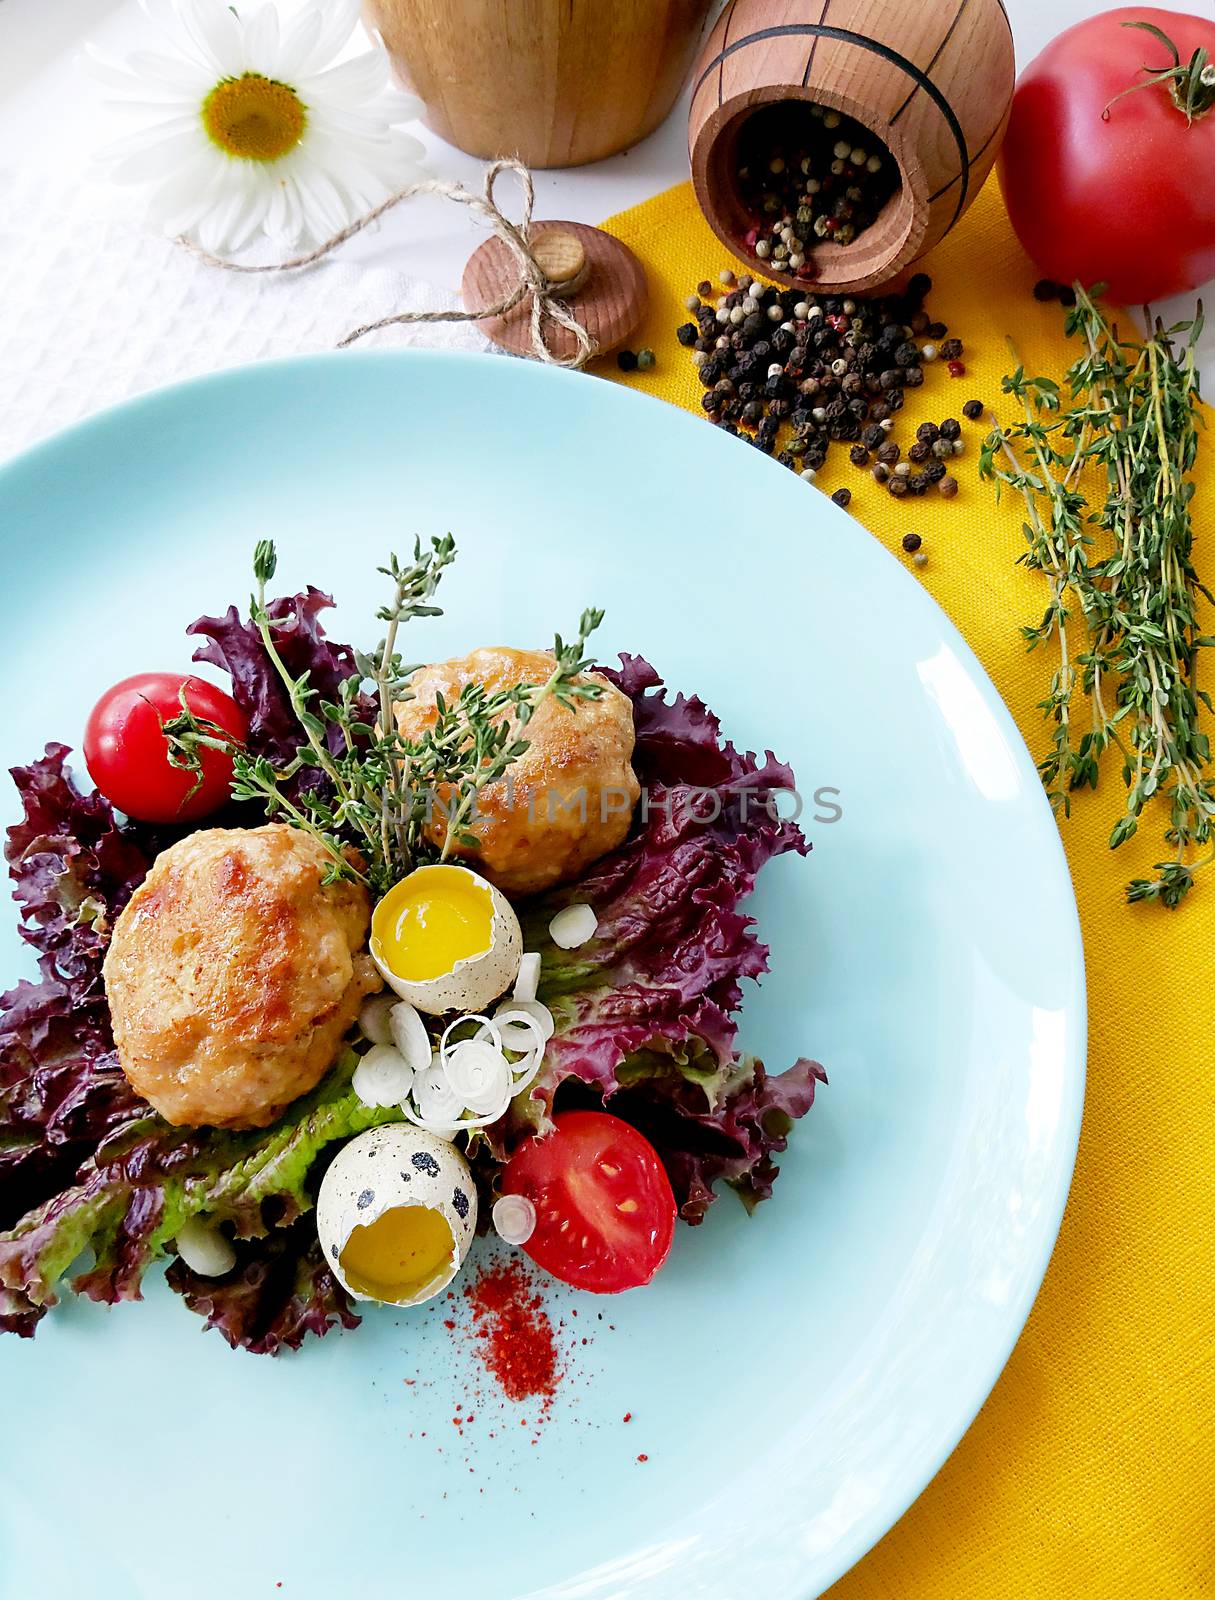 Fried cutlets with quail eggs garnished with herbs and tomatoes